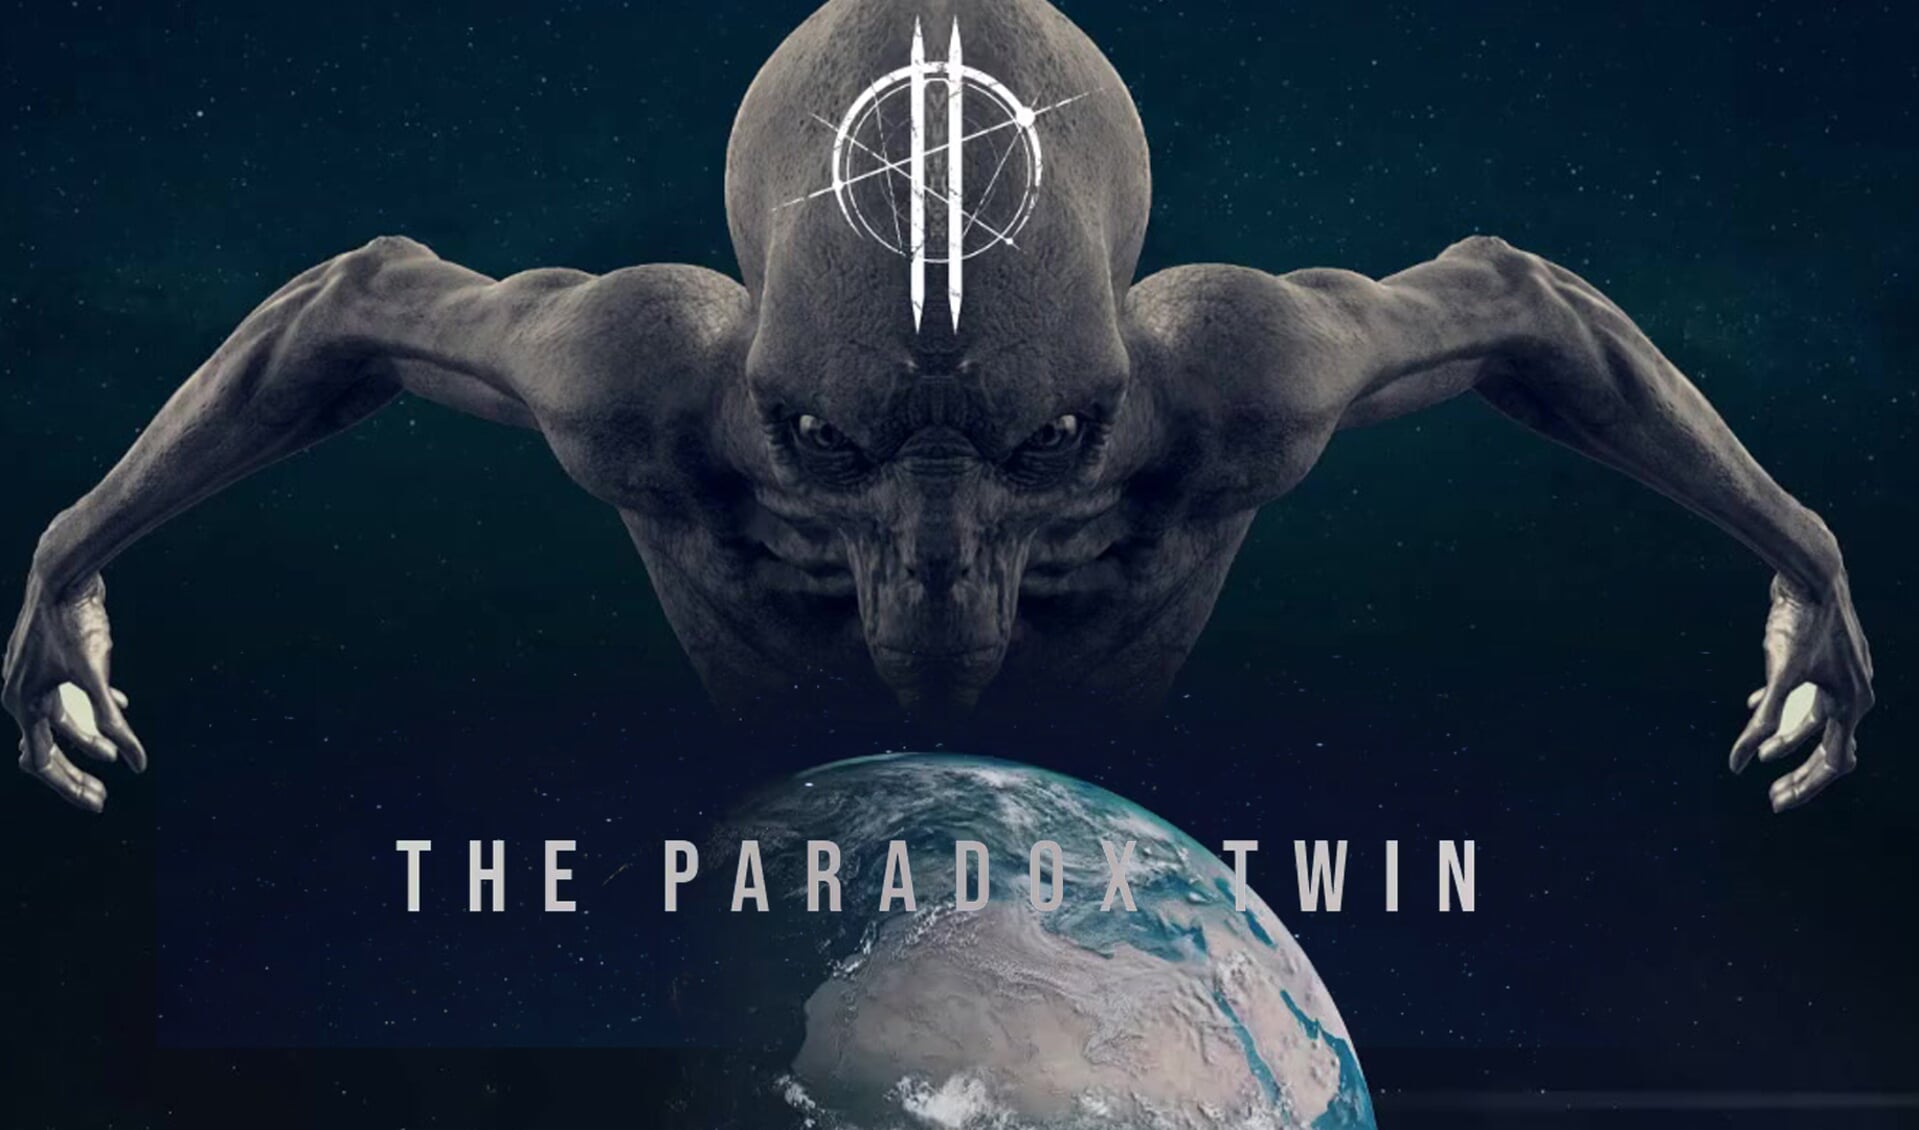 The Paradox Twin